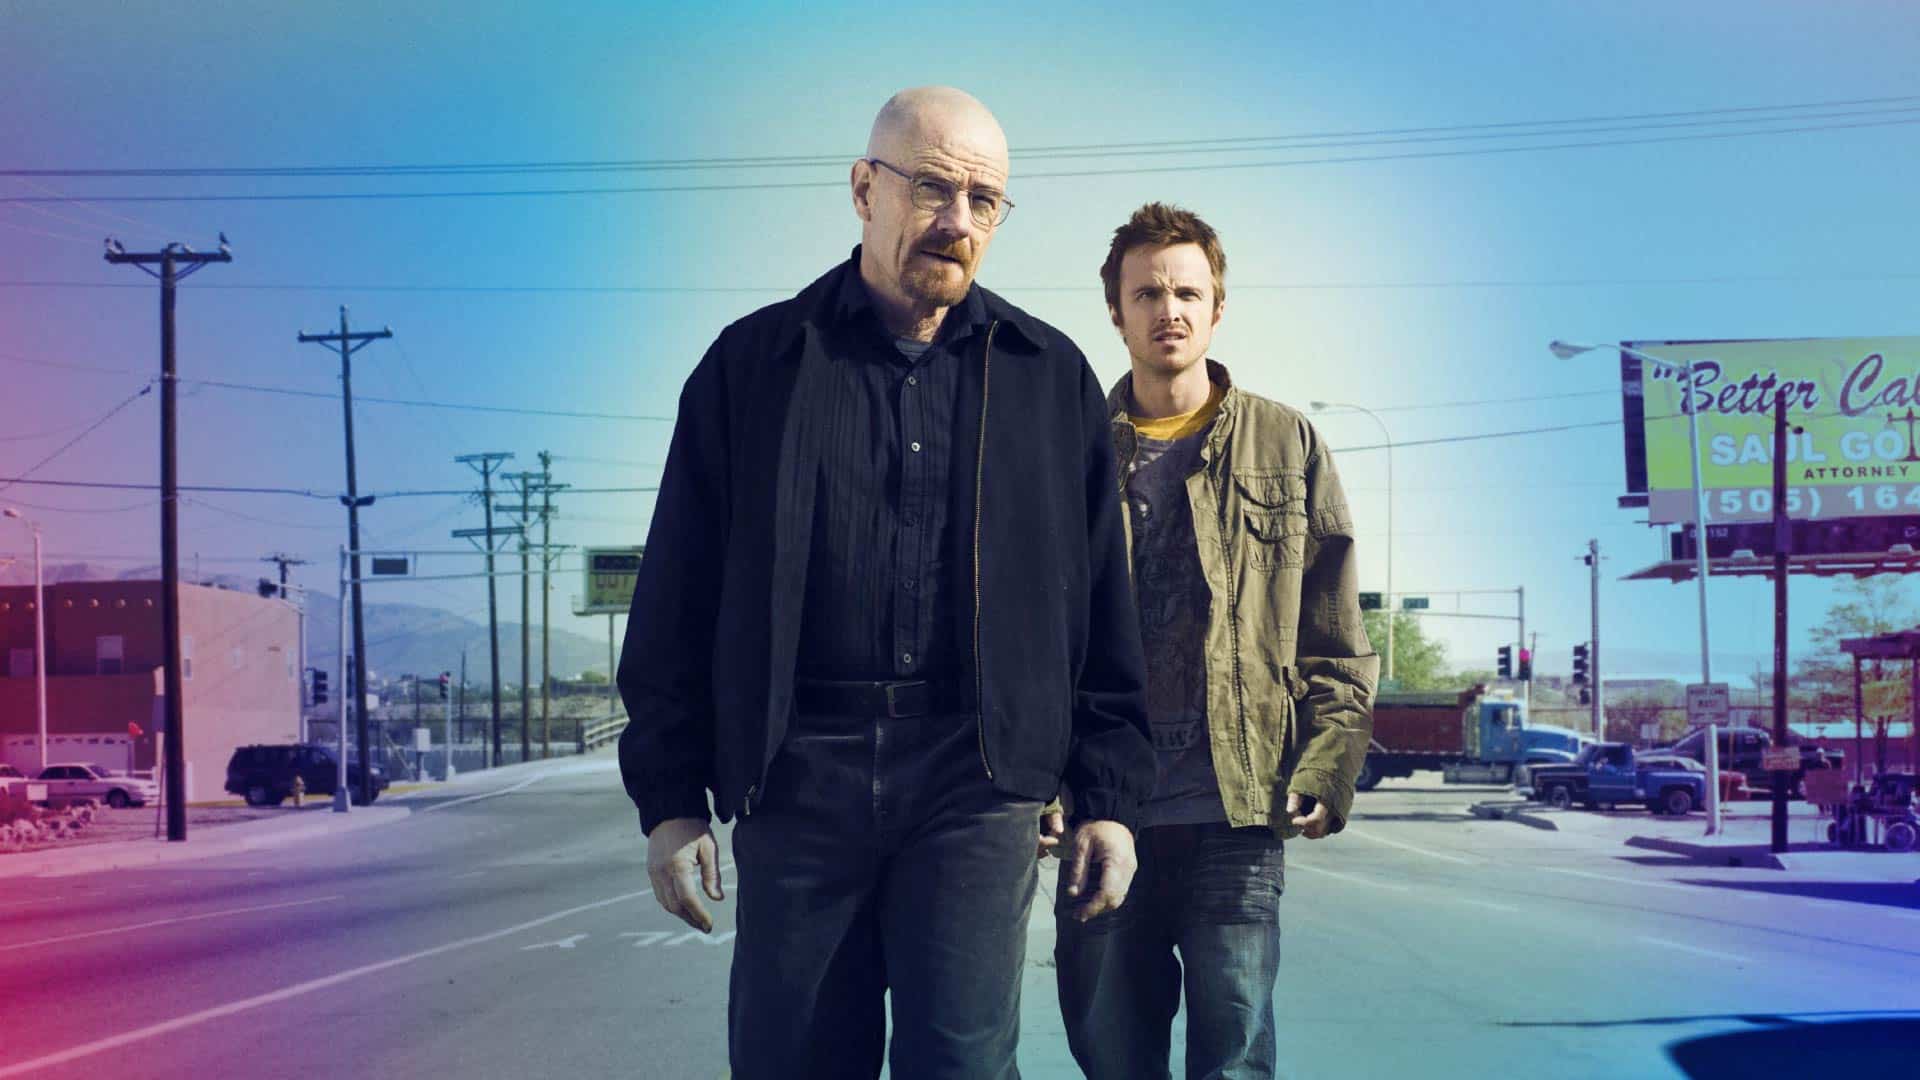 Walter and Jesse together in a picture.